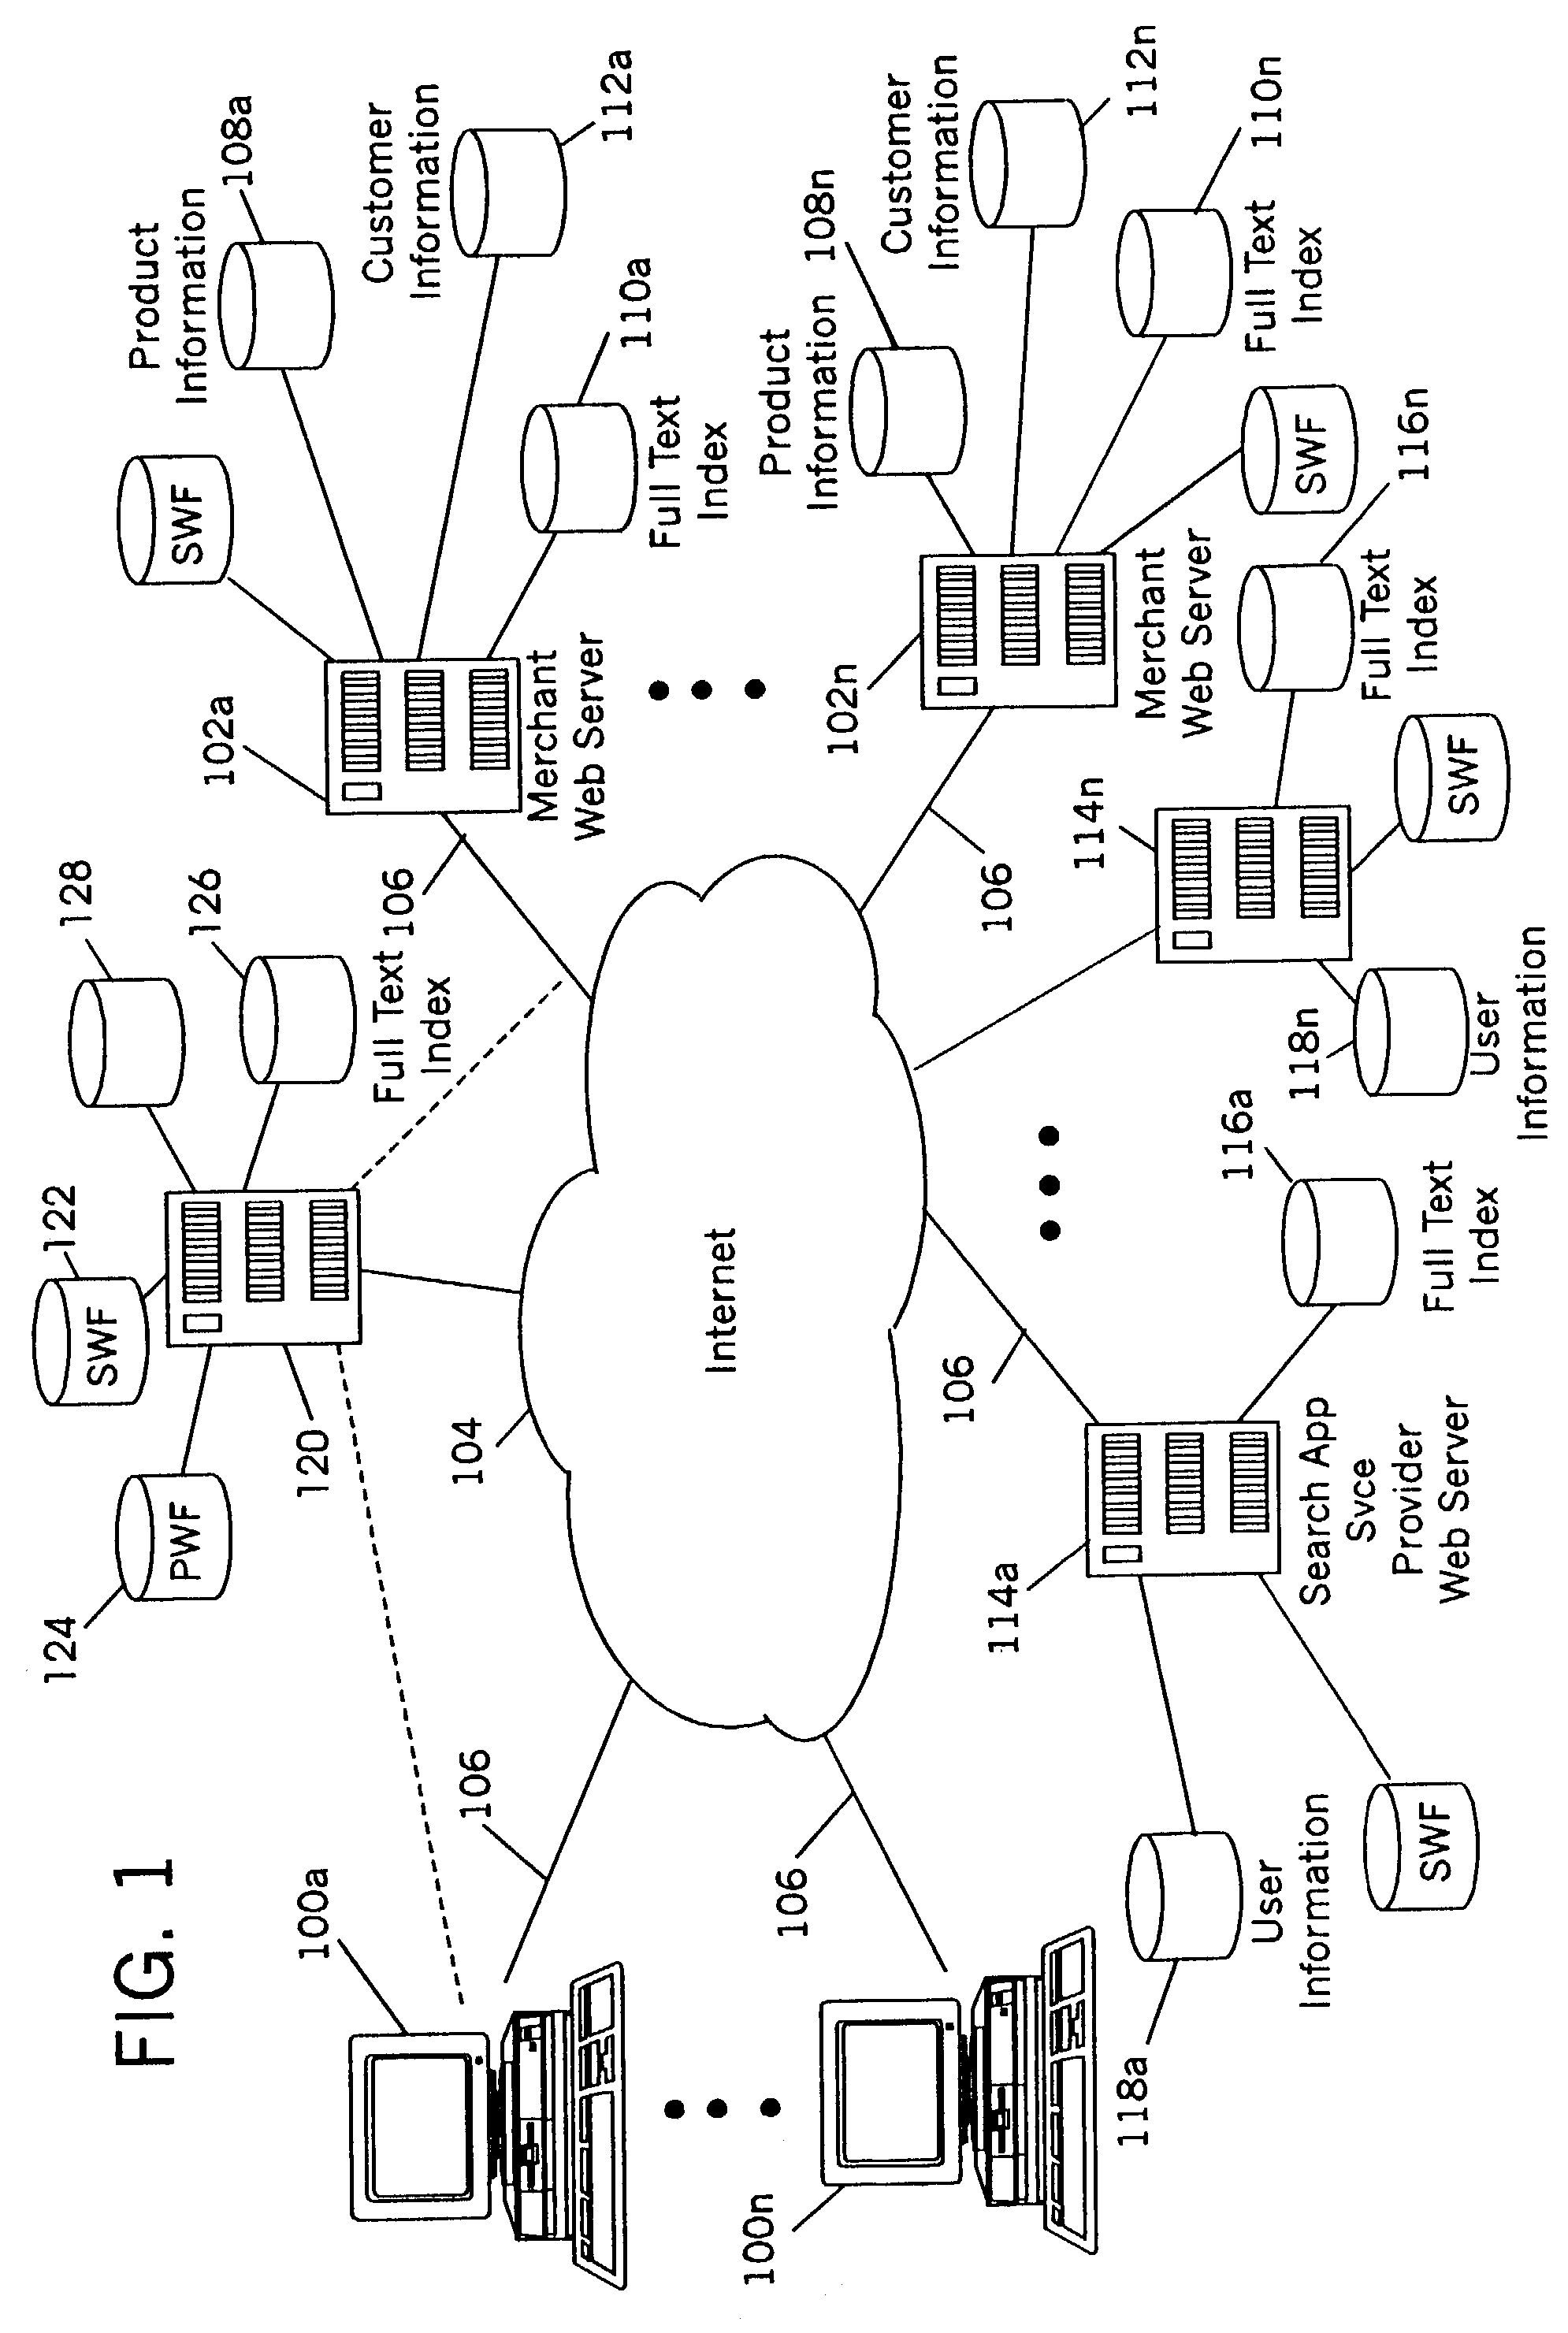 Method of promoting strategic documents by bias ranking of search results